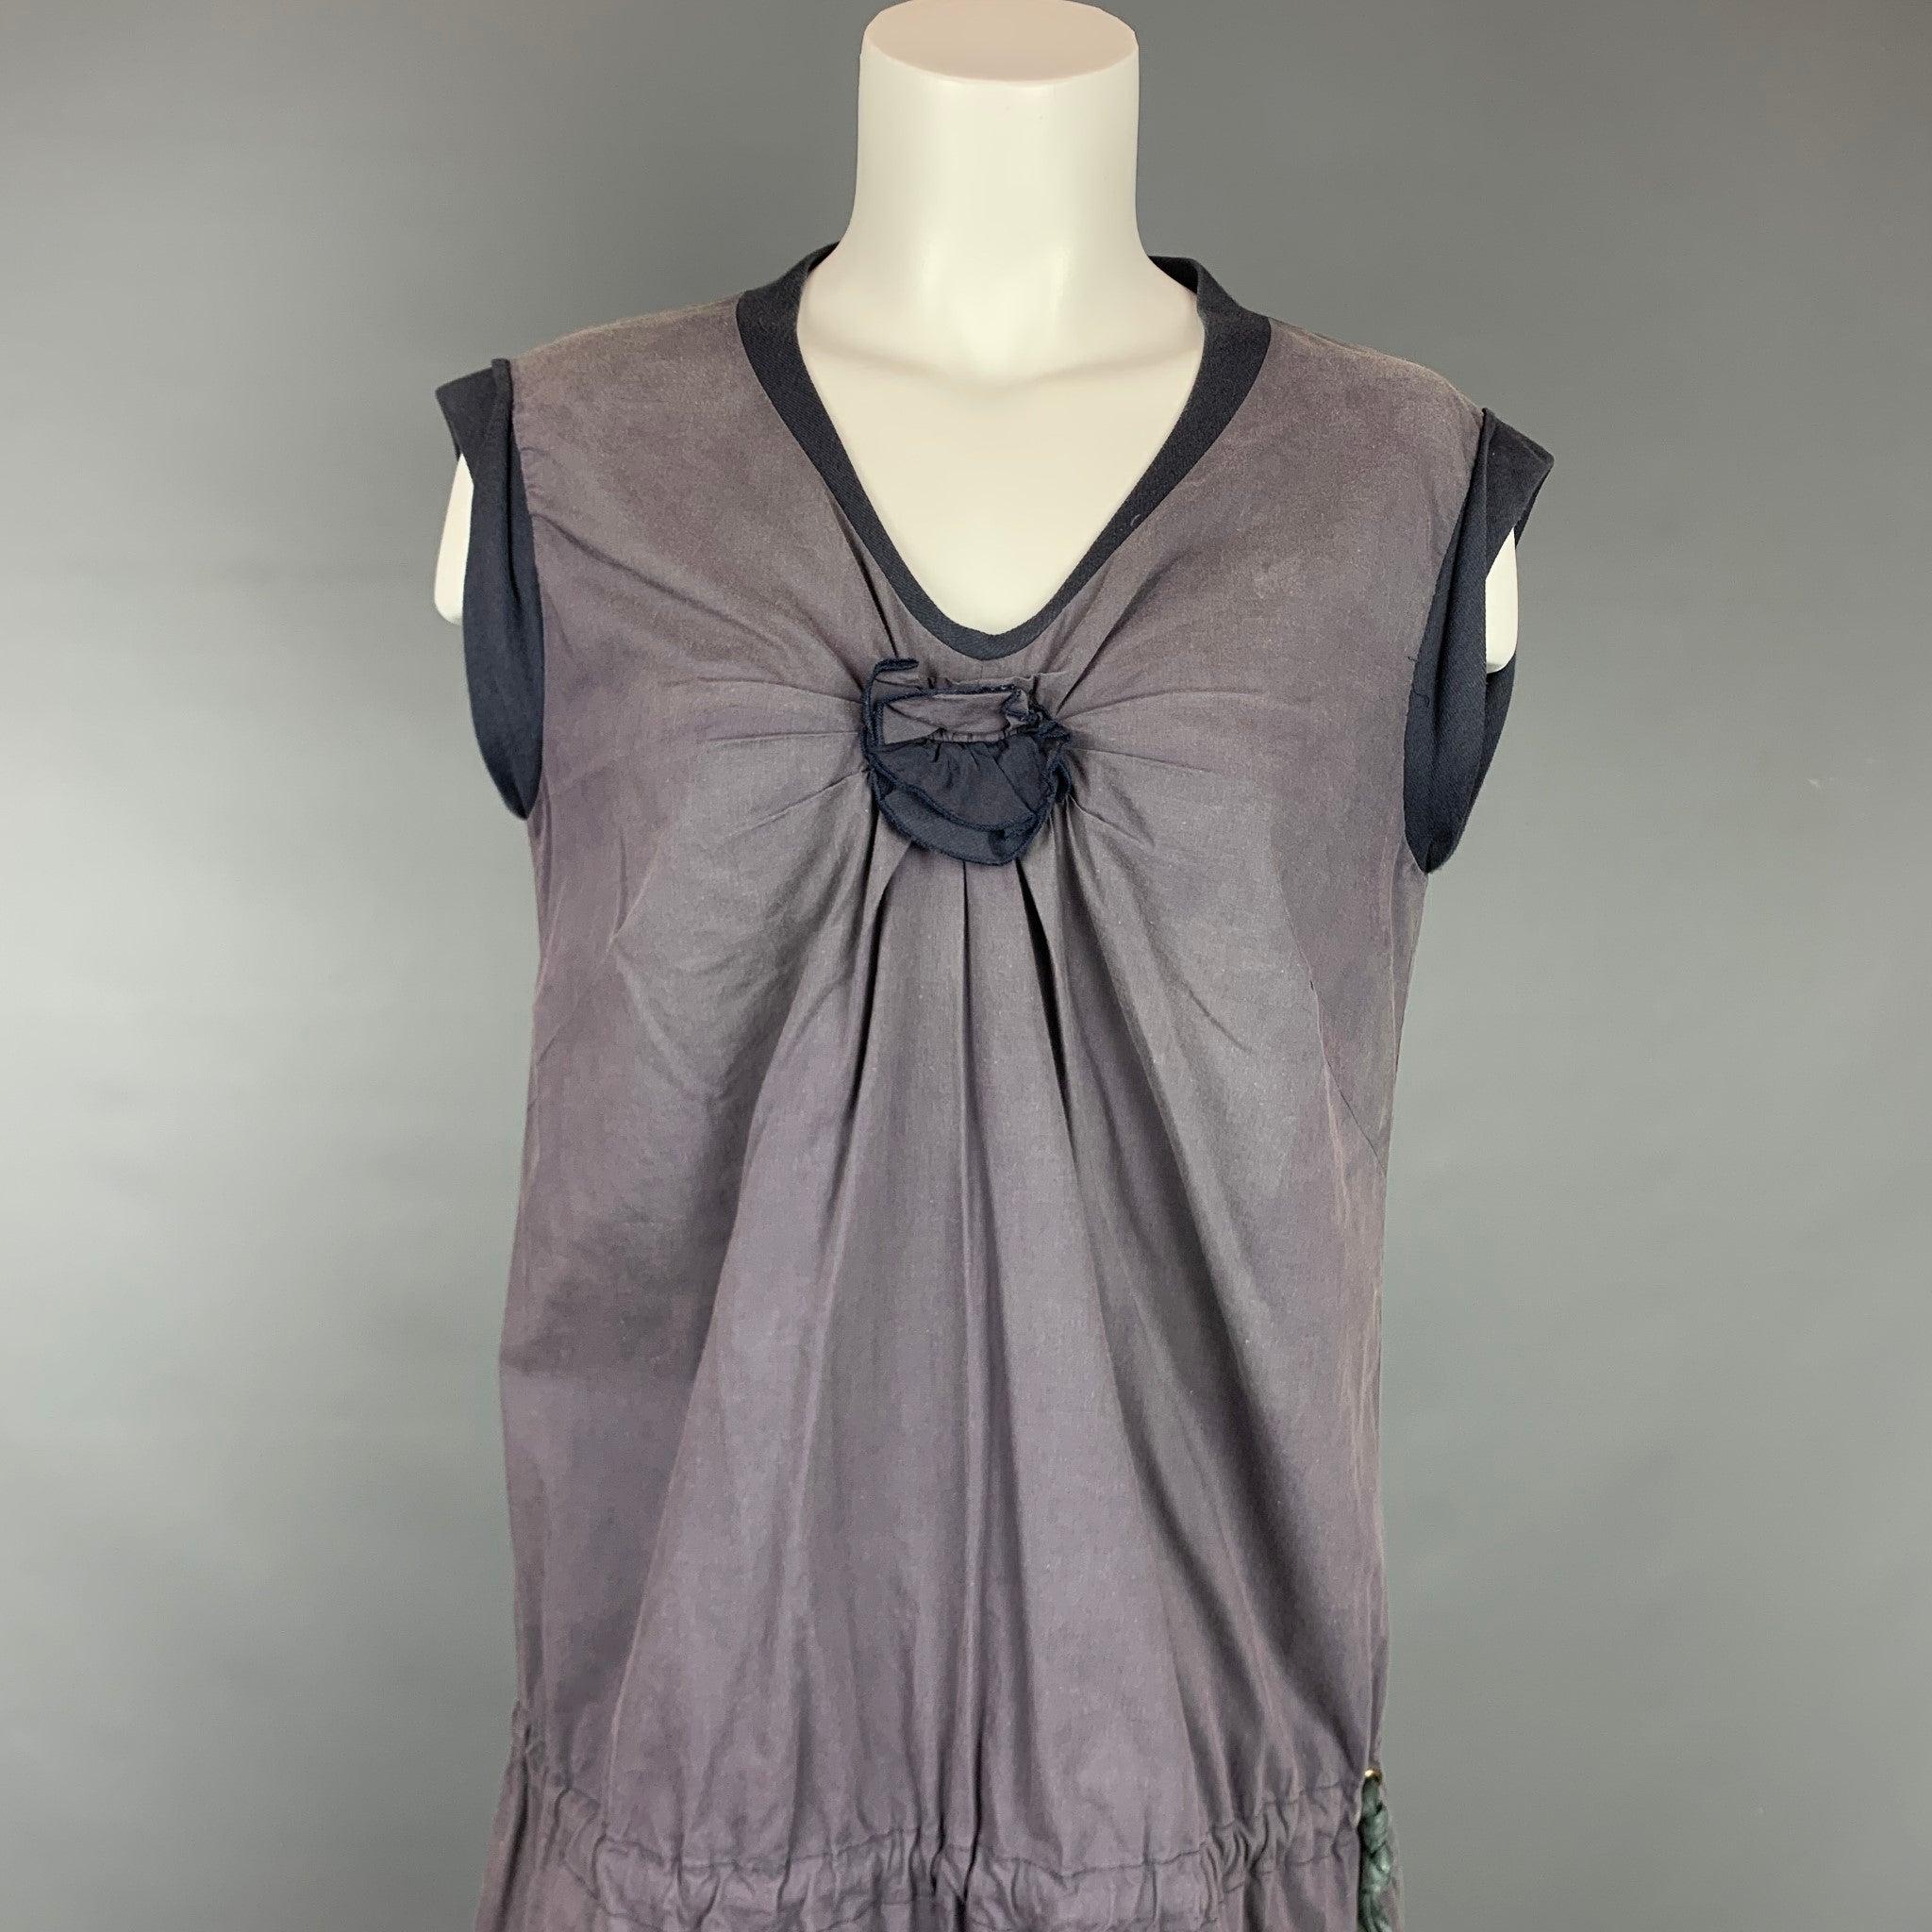 BRUNELLO CUCINELLI dress comes in a purple cotton / lycra featuring a dropped waist, drawstring, floral applique, and a v-neck. Made in Italy.Very Good
Pre-Owned Condition. 

Marked:   L 

Measurements: 
 
Shoulder: 16 inches  Bust: 38 inches 